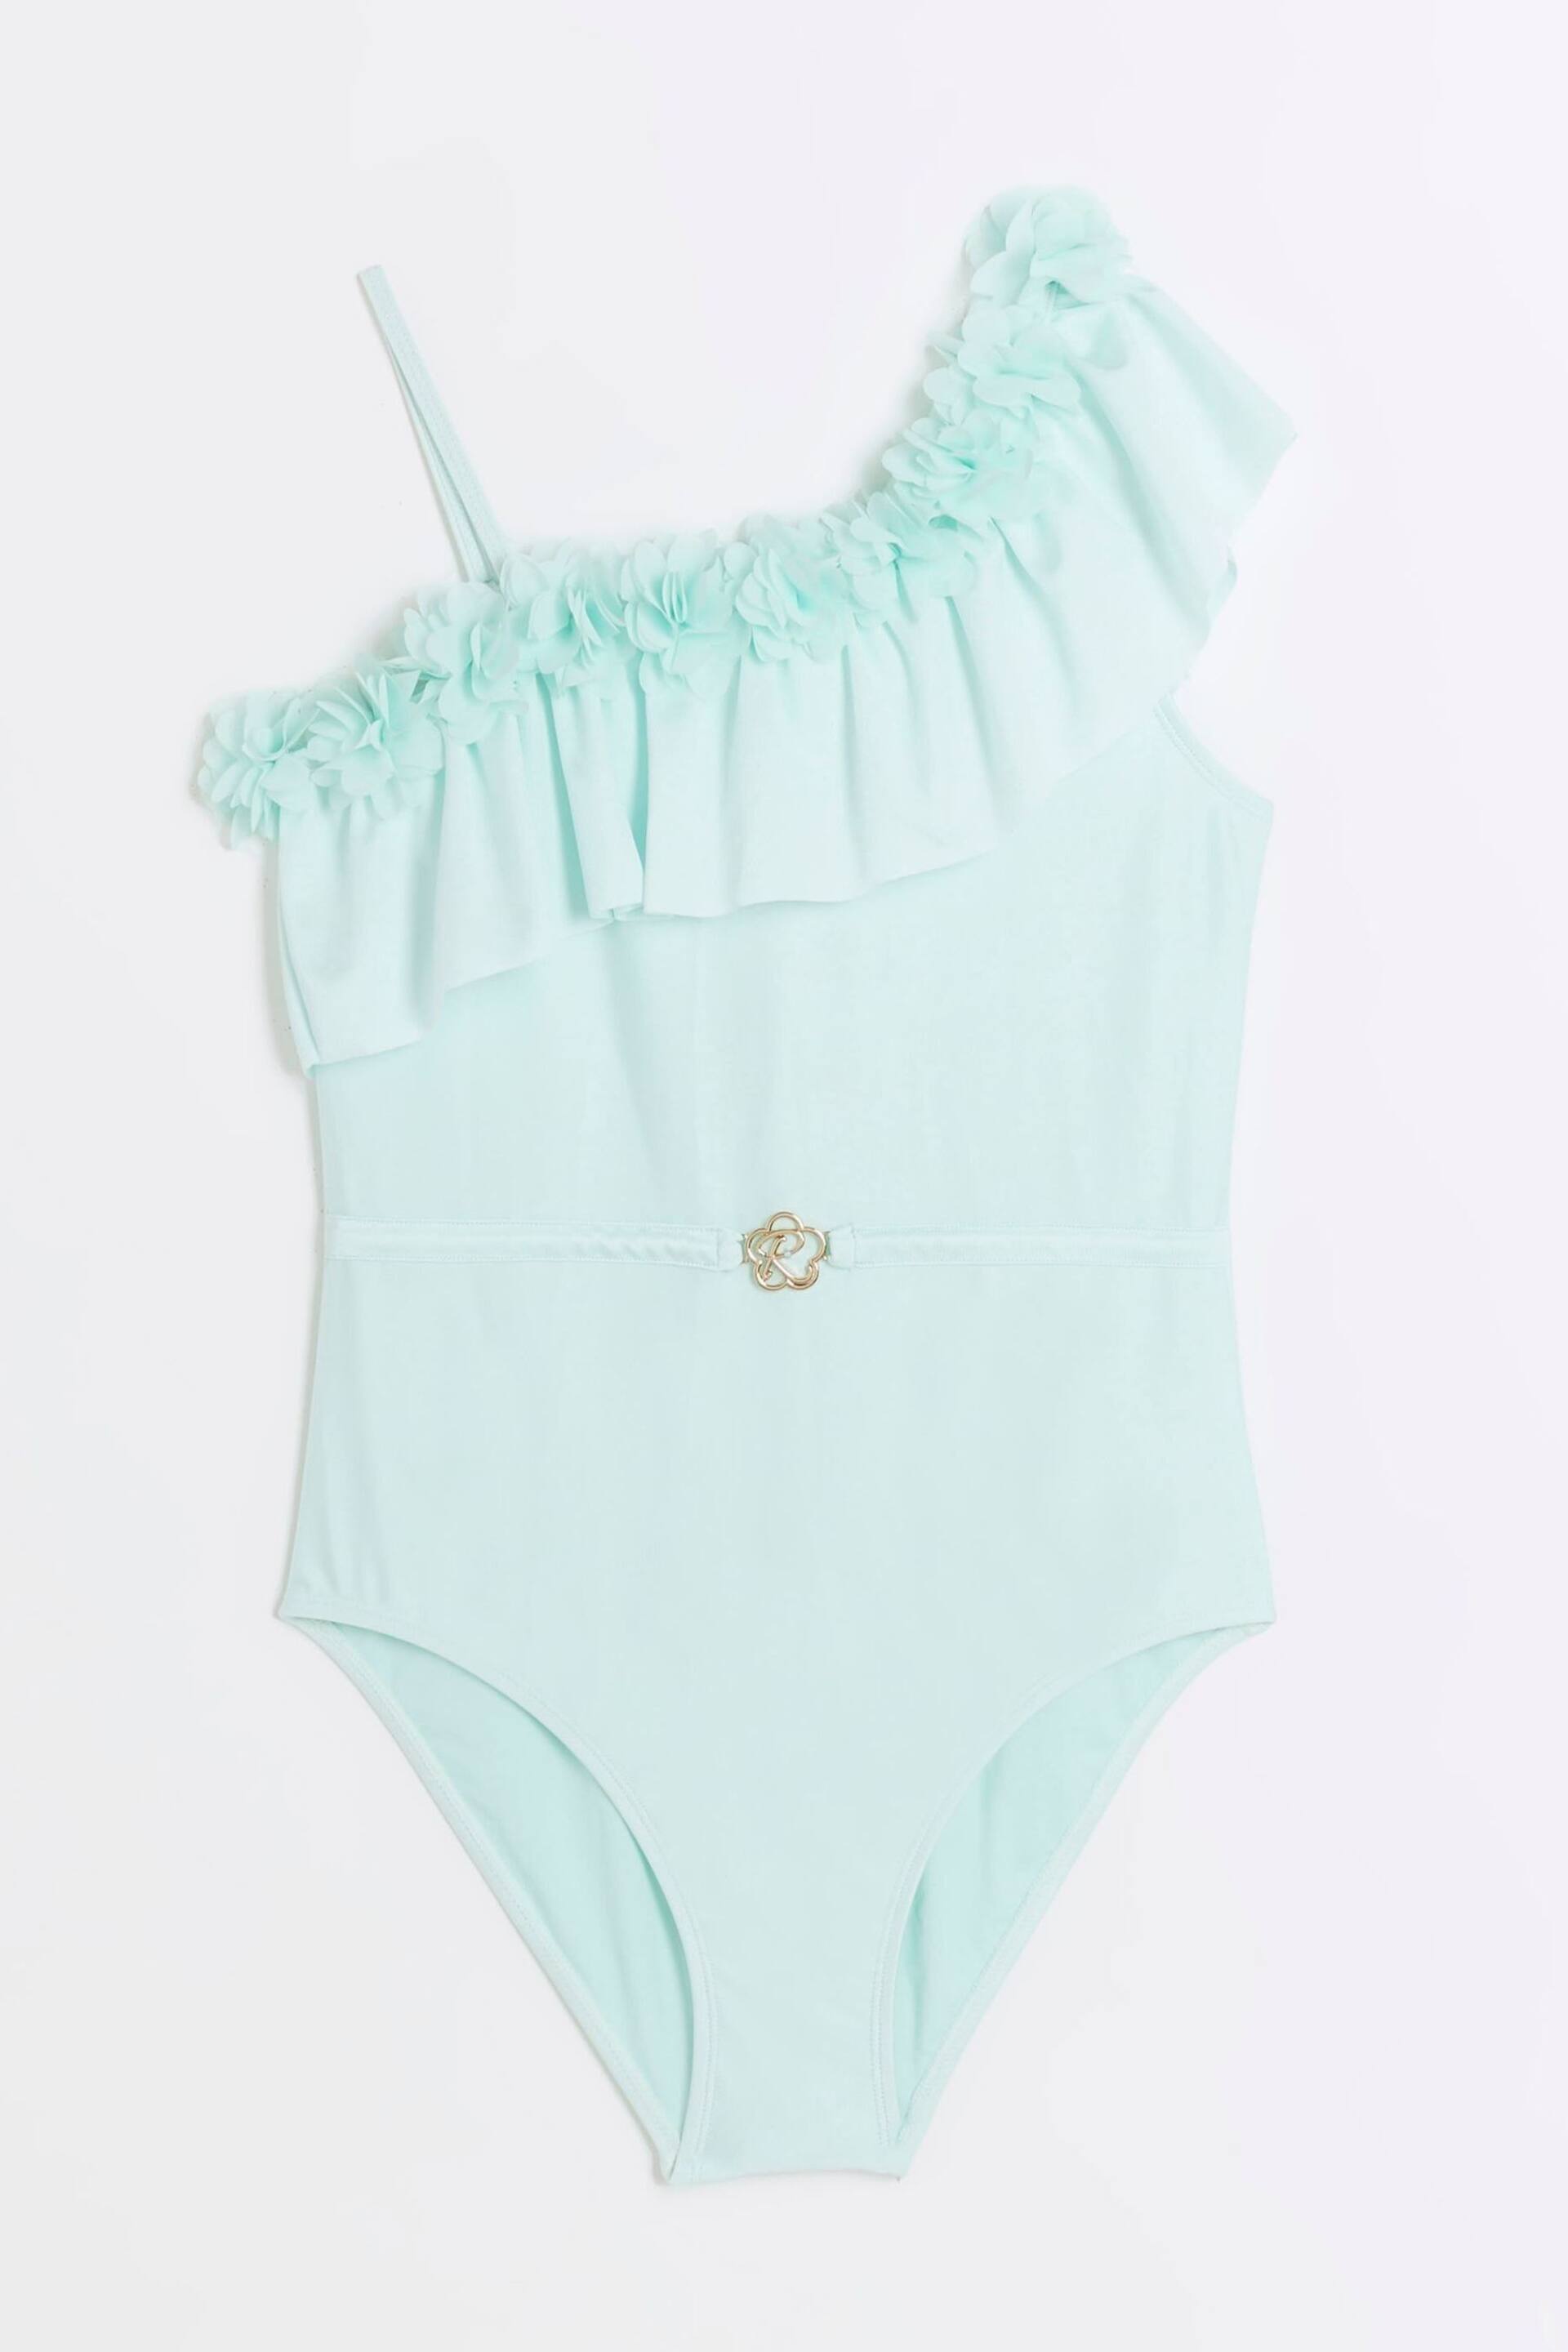 River Island Green Girls Floral Swimsuit - Image 1 of 4